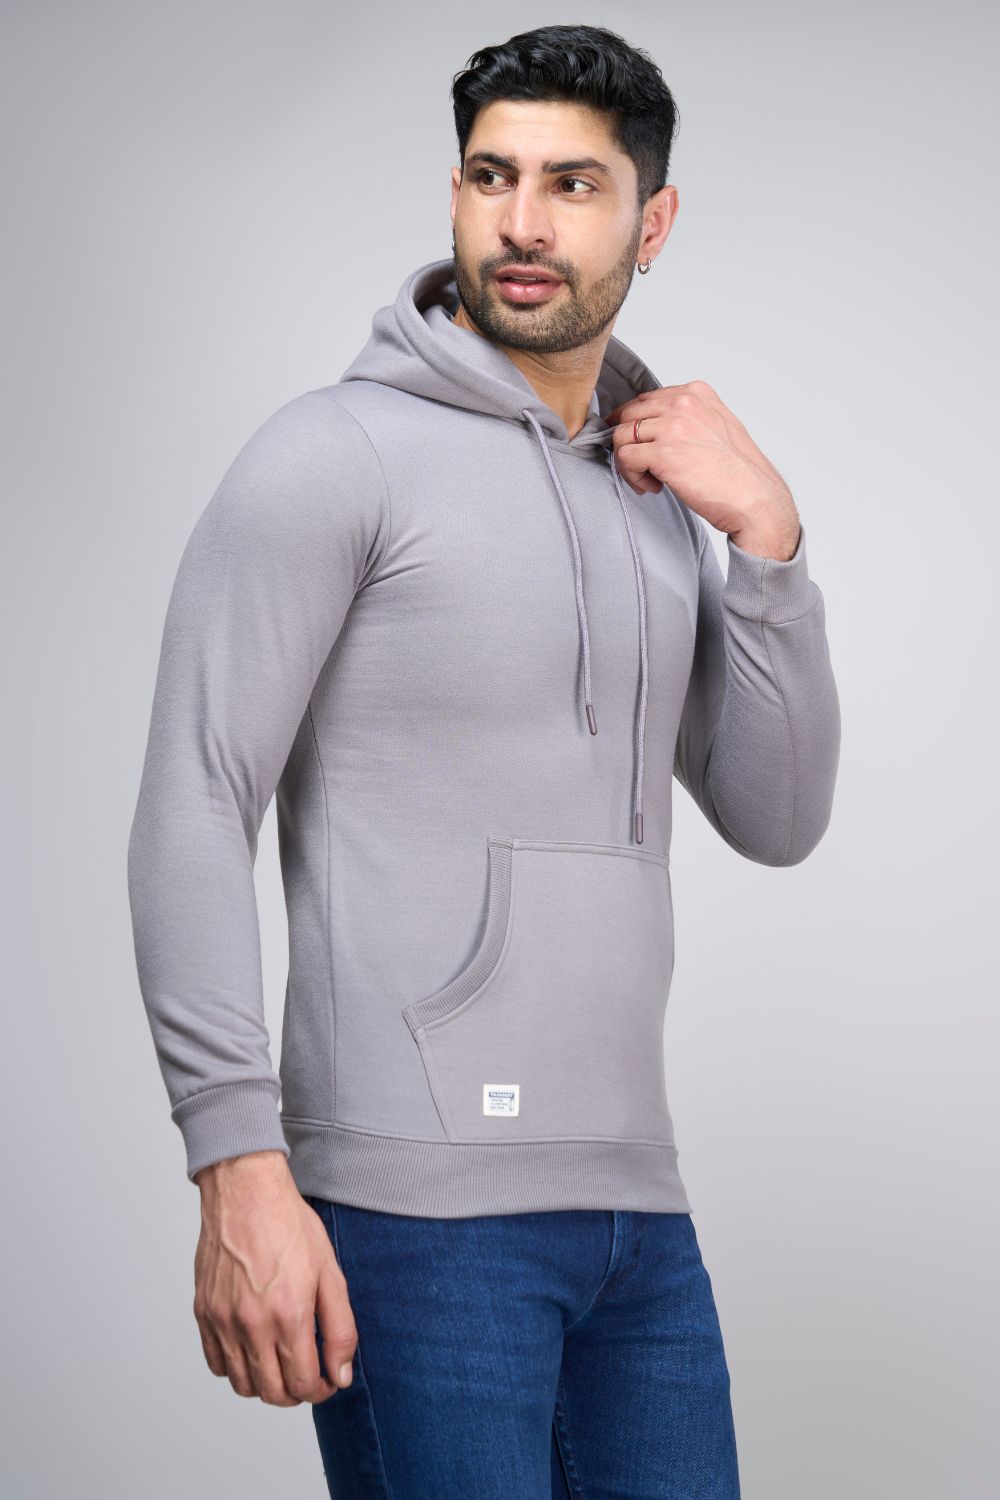 Grey Mist colored, hoodie for men with full sleeves and relaxed fit, Pocket view.